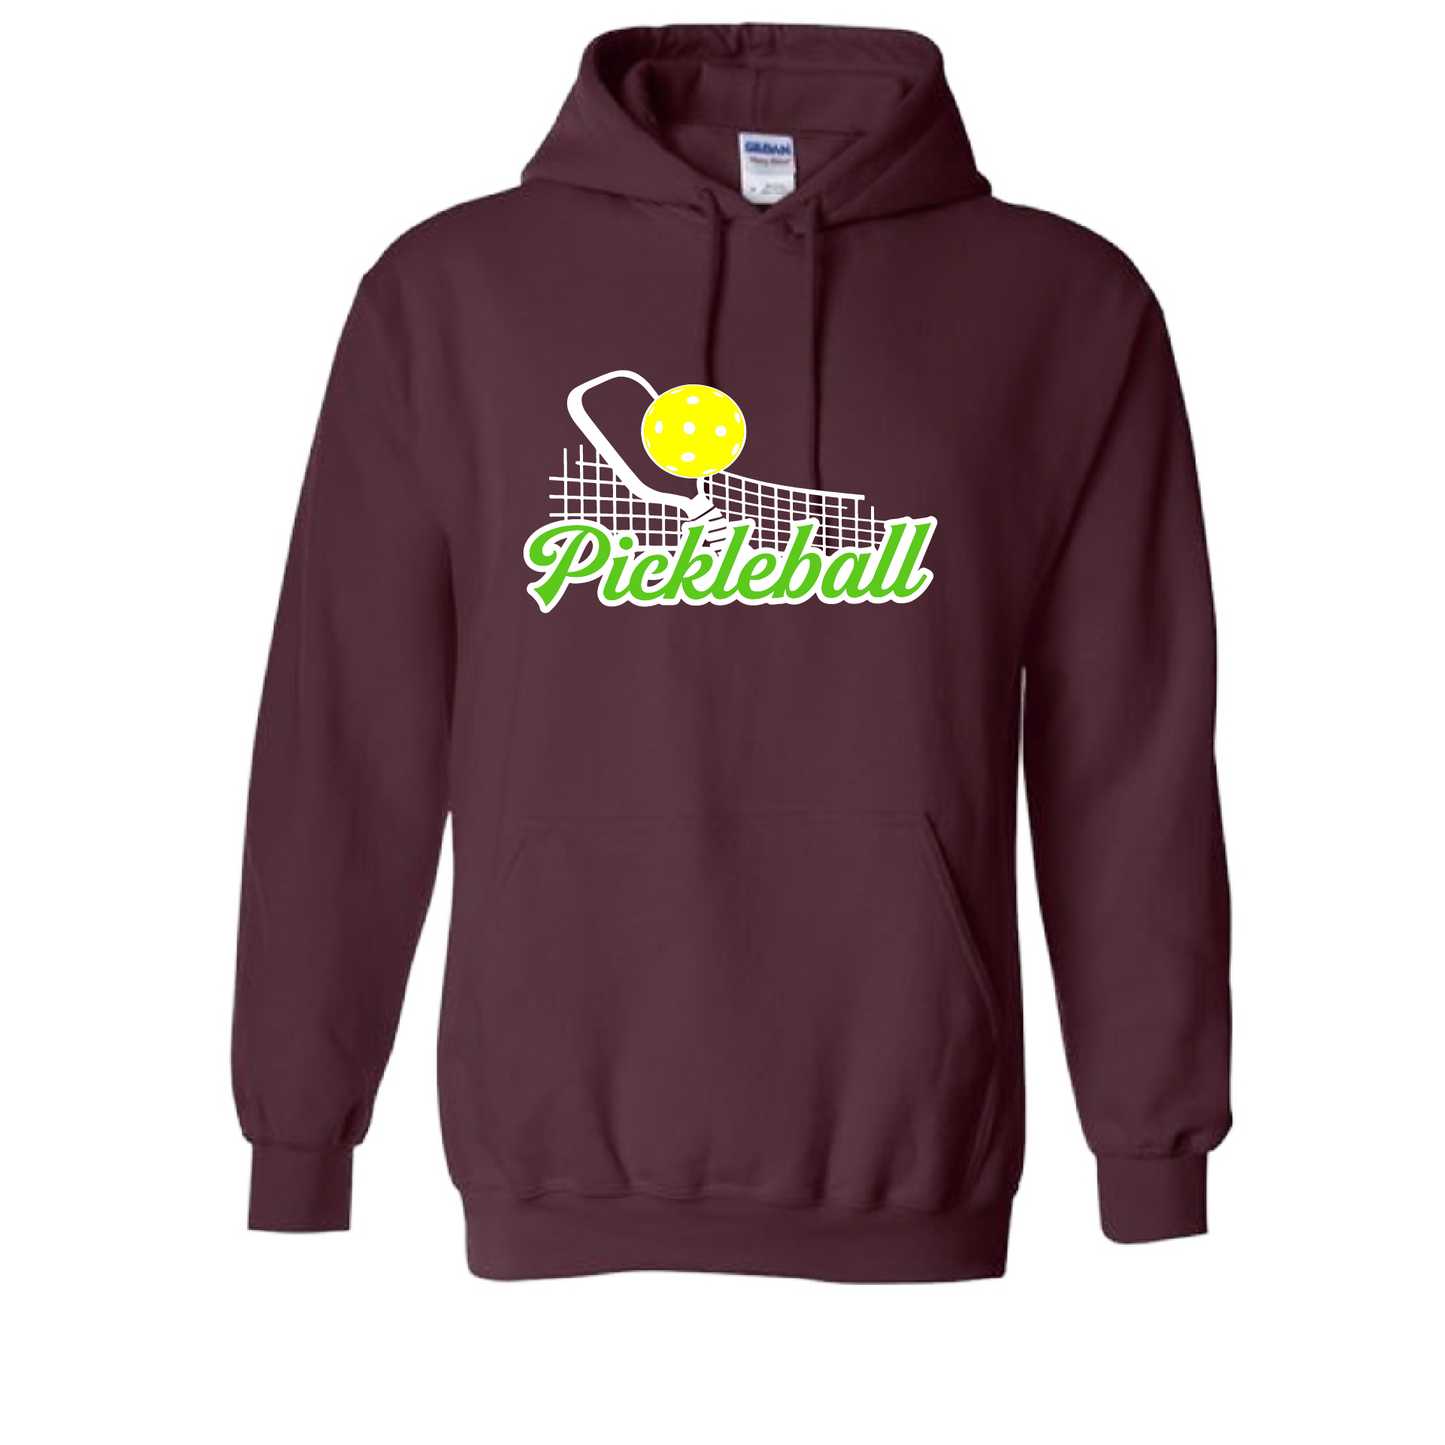 Pickleball Design: Pickleball and Net  Unisex Hooded Sweatshirt: Moisture-wicking, double-lined hood, front pouch pocket.  This unisex hooded sweatshirt is ultra comfortable and soft. Stay warm on the Pickleball courts while being that hit with this one of kind design.